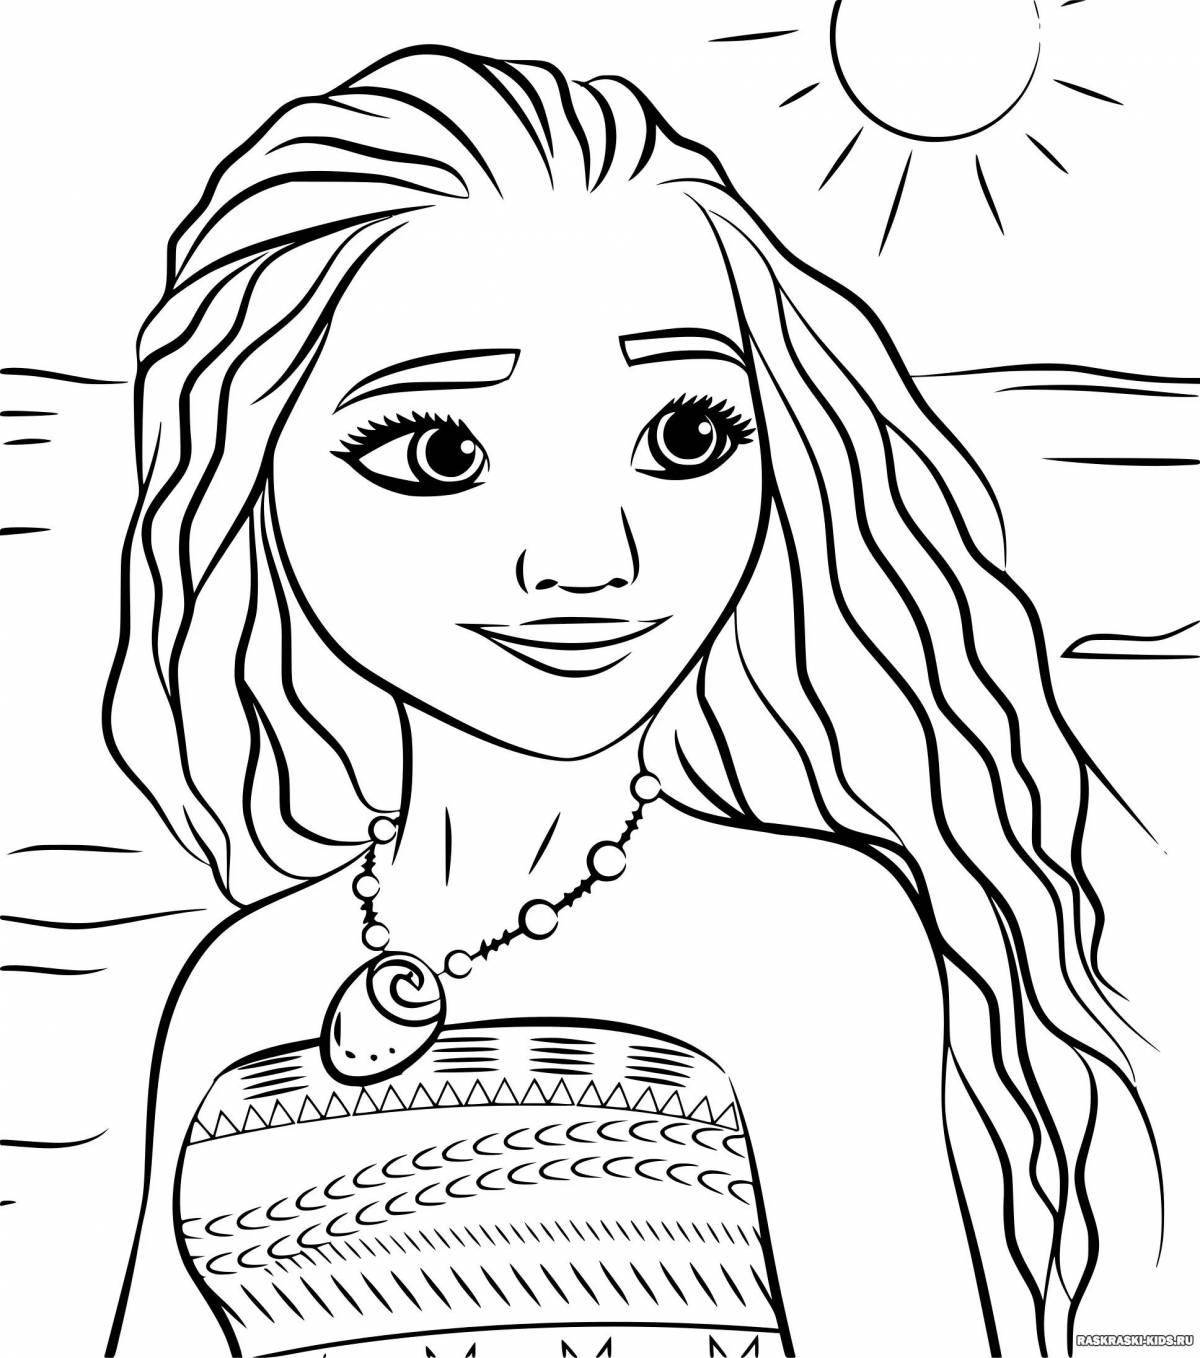 Radiant coloring page popular for 12 year old girls